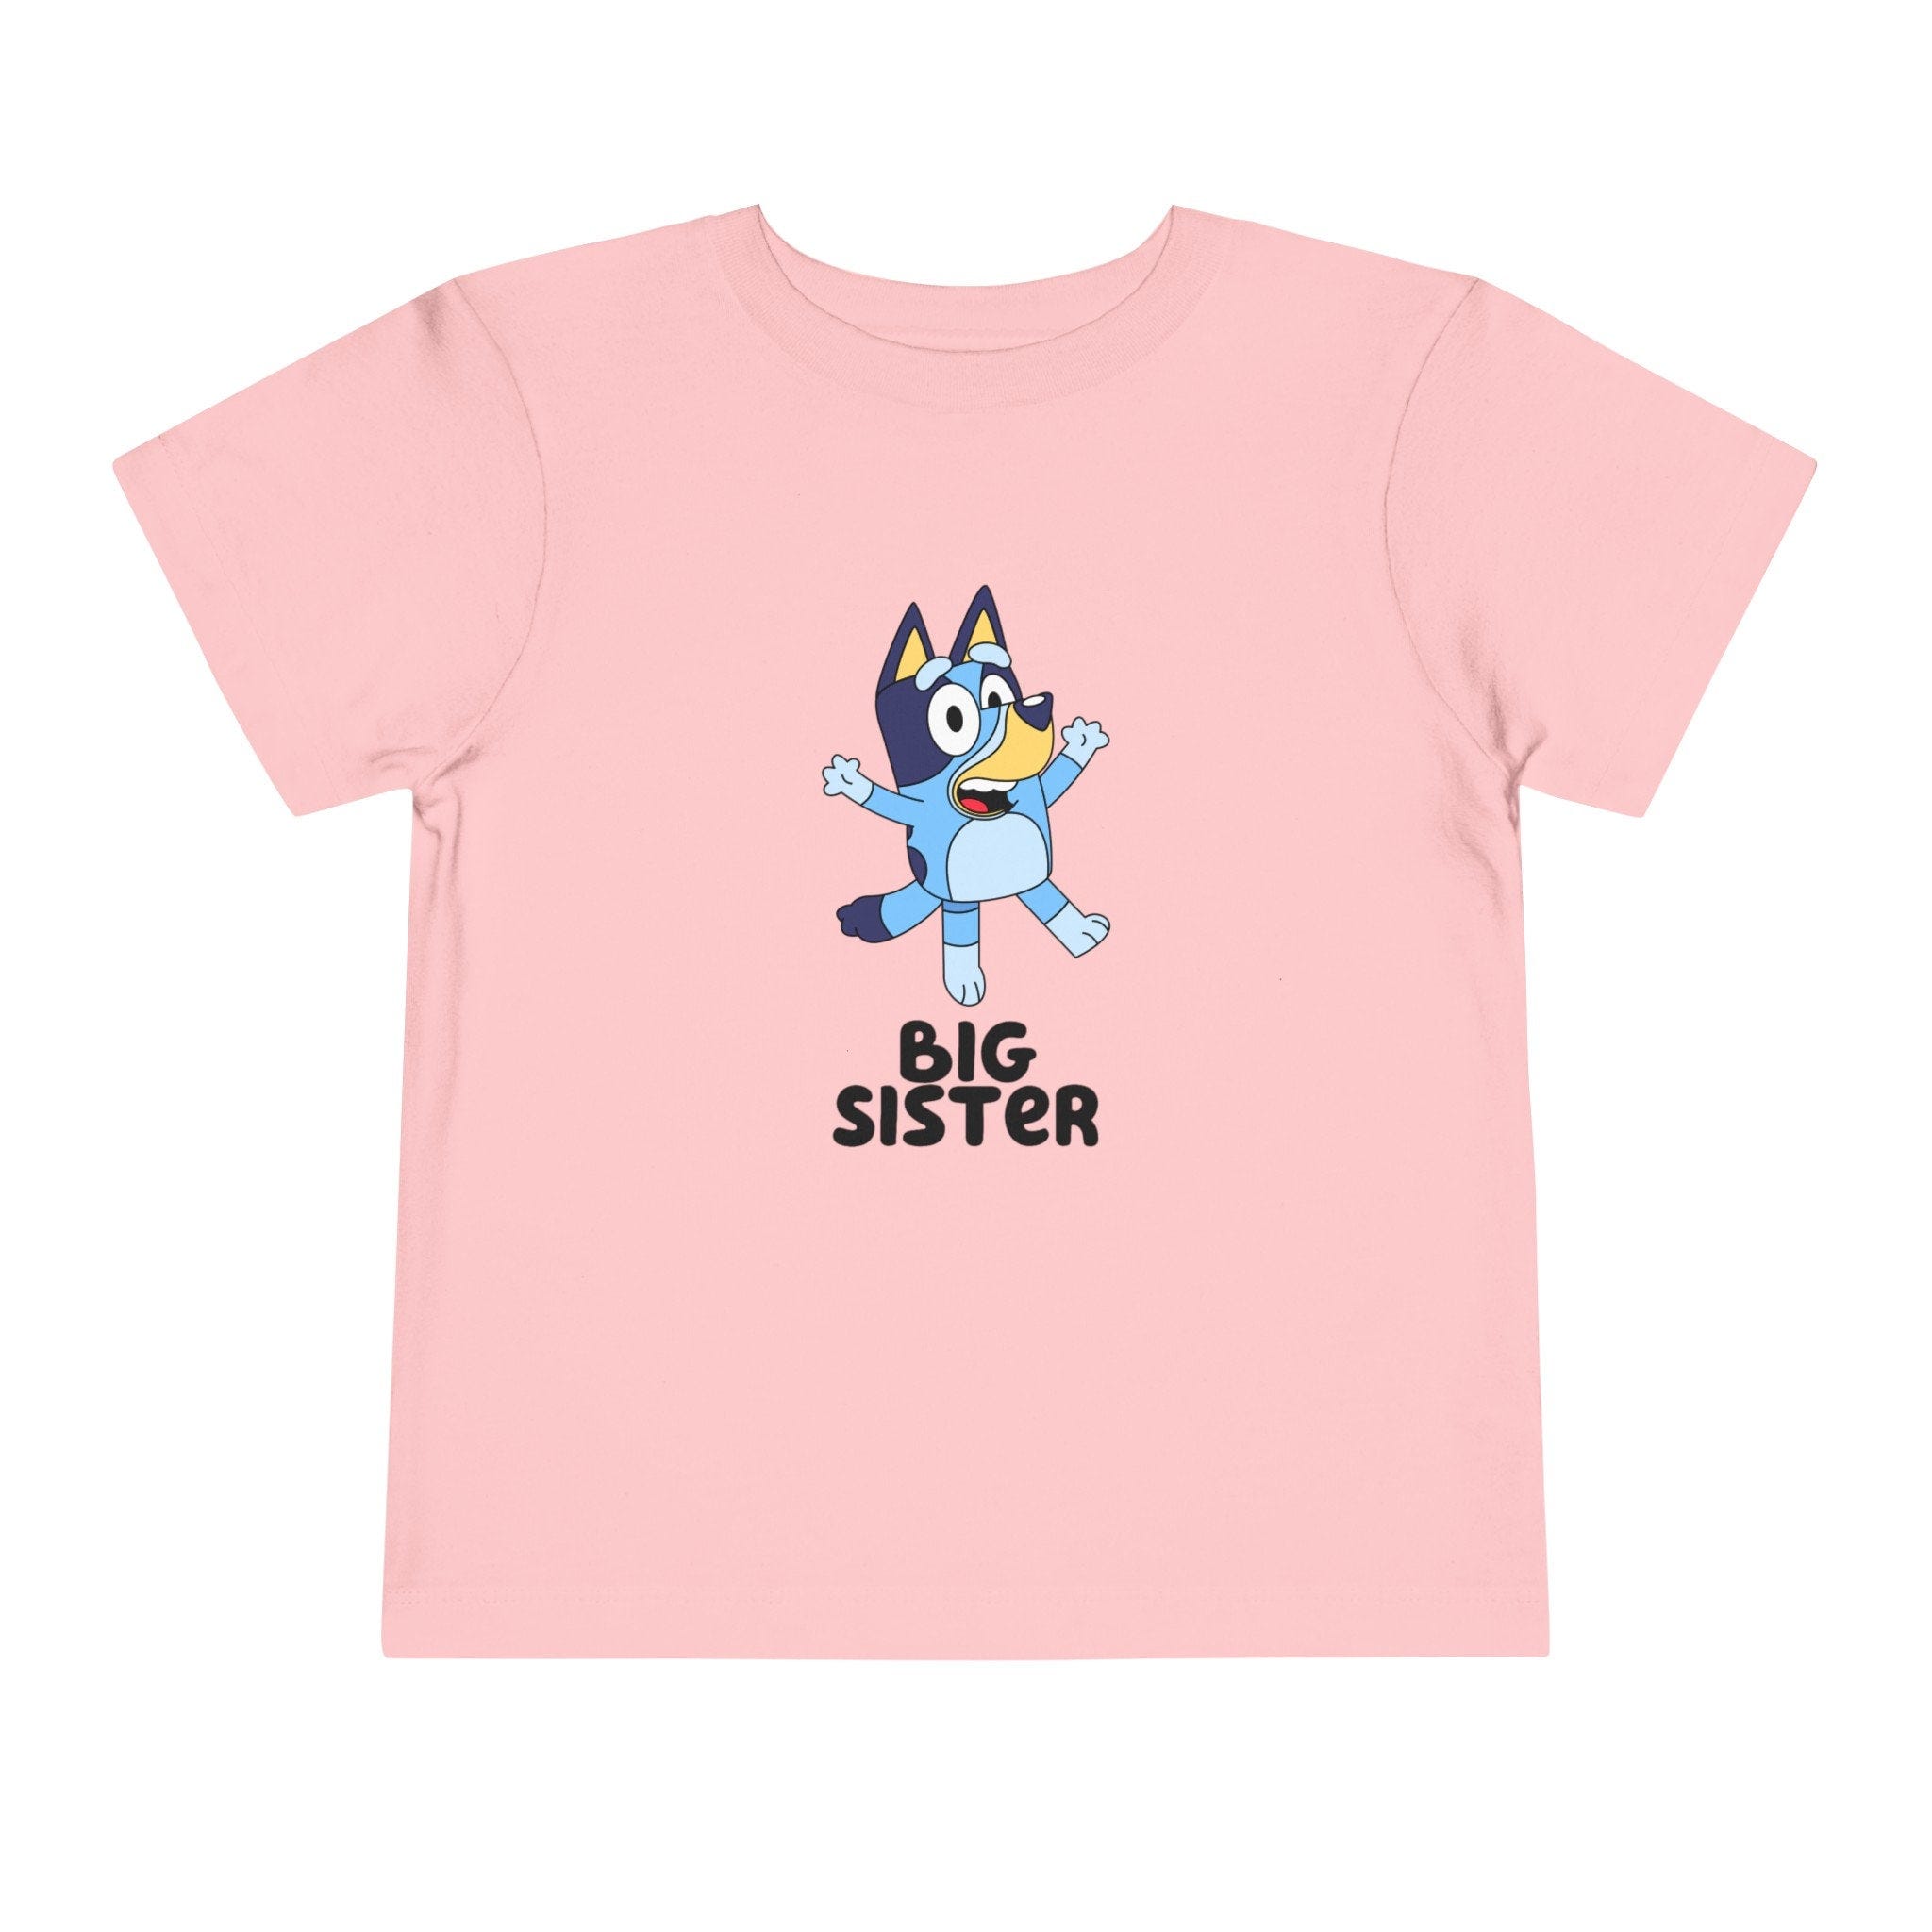 Bluey Big Sister, Bluey and Friends, Birthday, Dance Mode, Party, Bluey Gift -Toddler Short Sleeve Tee